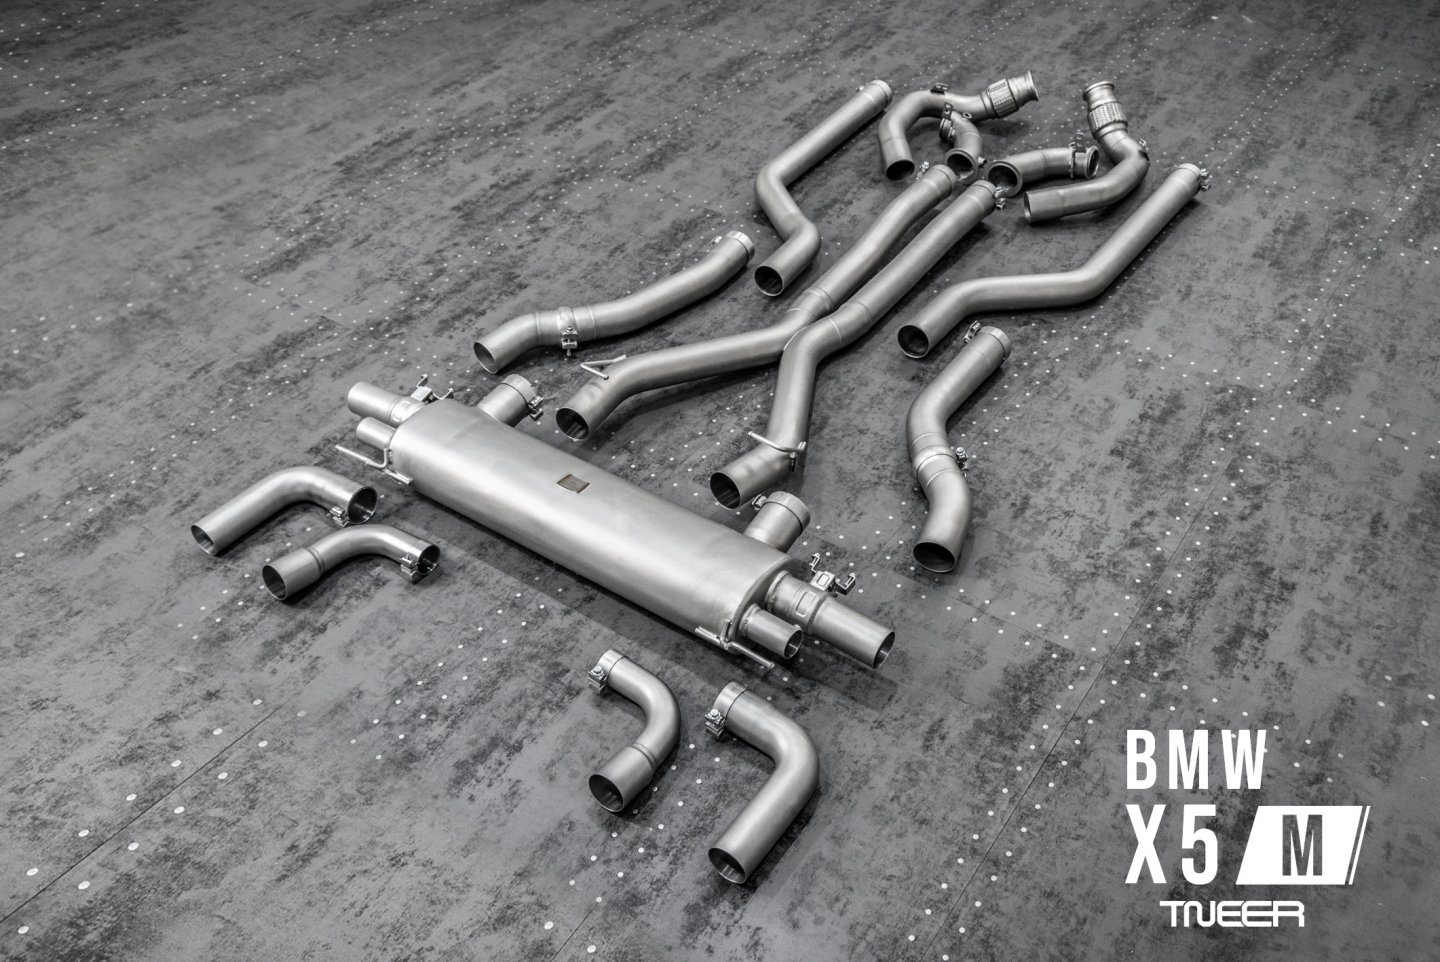 BMW F95 (X5M) TNEER Exhaust System with EV and TACS